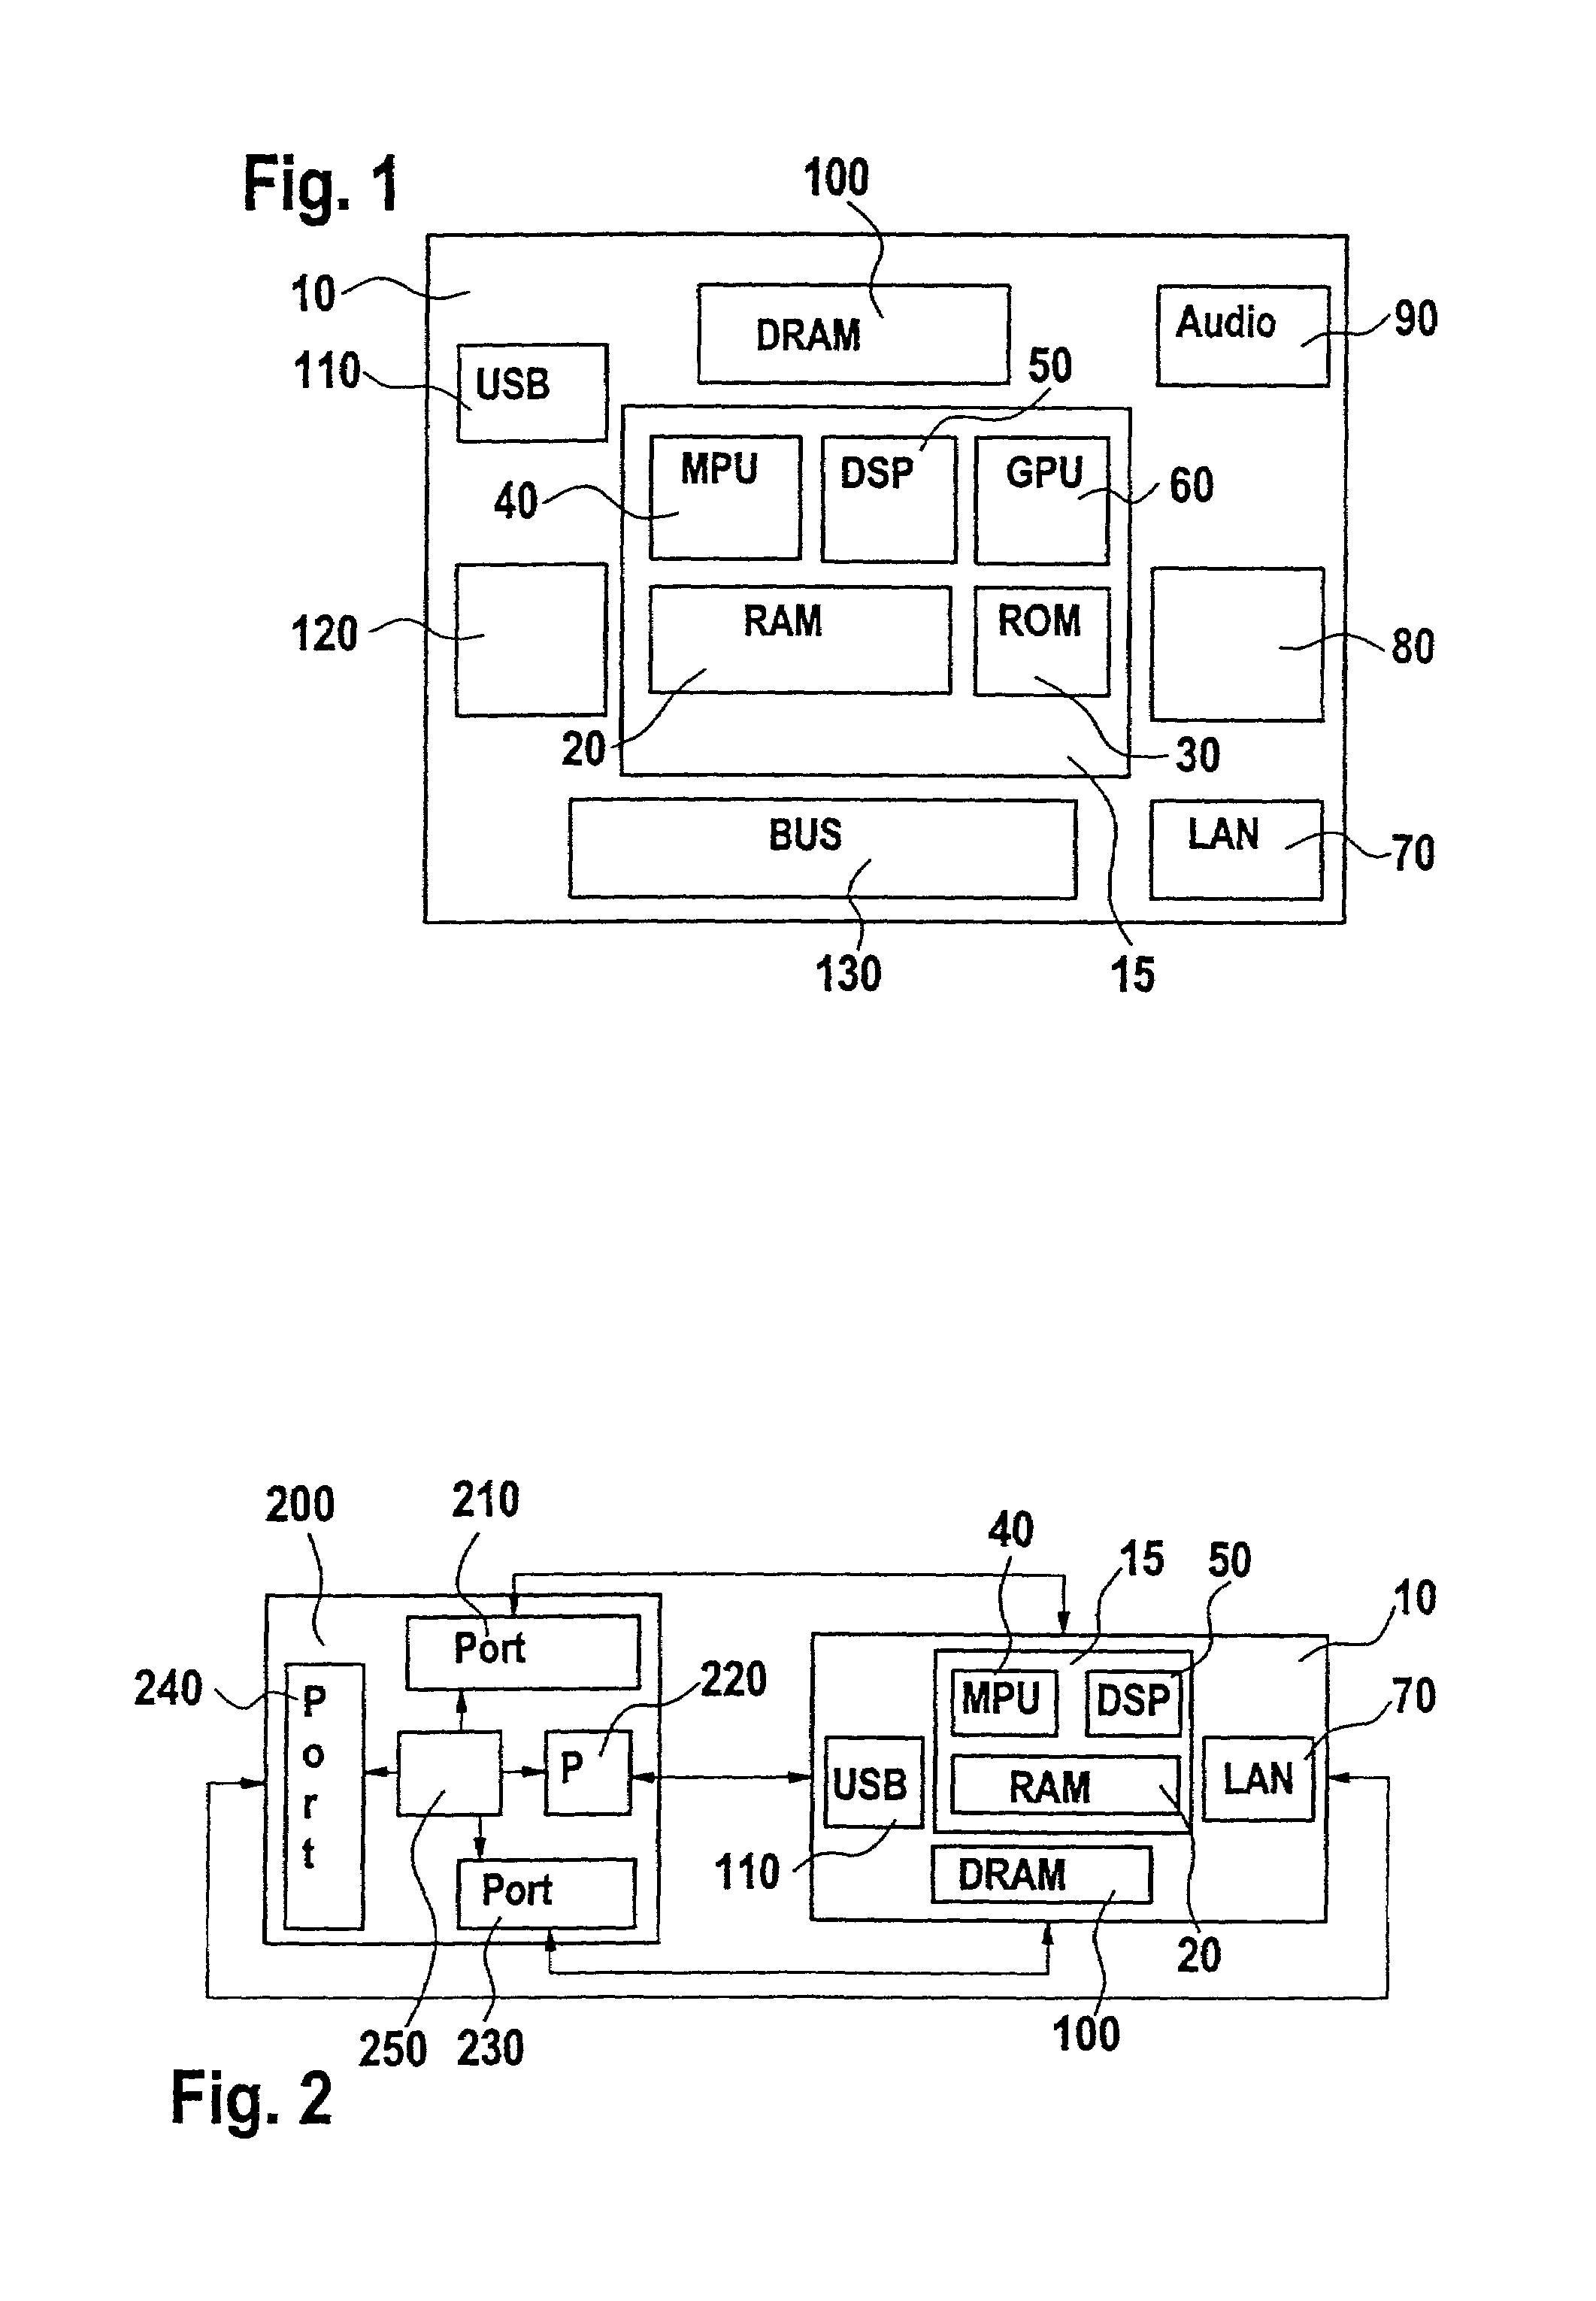 Integrated circuit tester with multi-port testing functionality